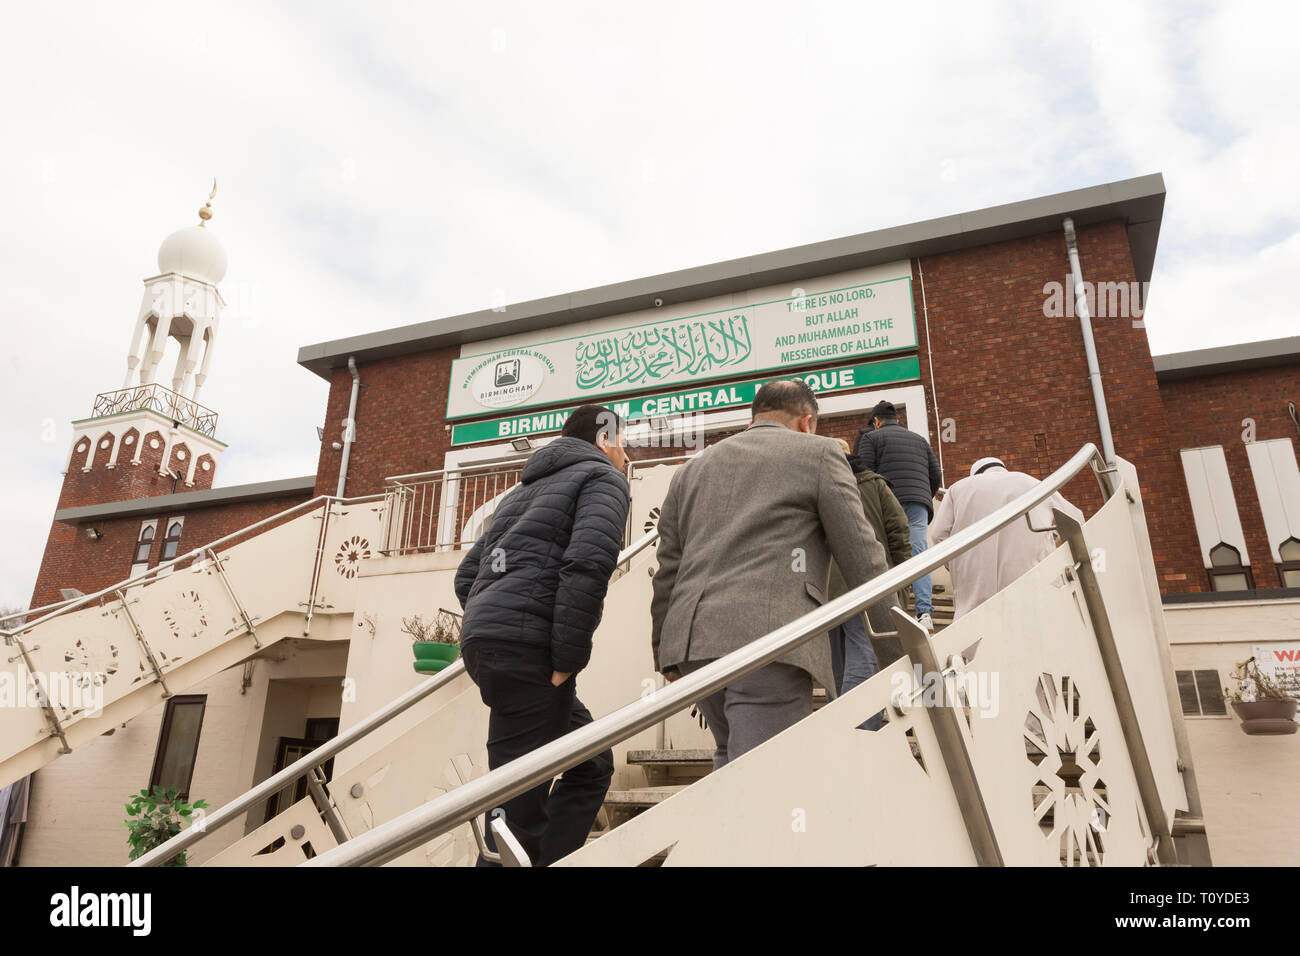 Birmingham, UK. 22nd March, 2019. A week after the New Zealand mosque murders and less than 48 hours after several Birmingham mosques were vandalised, people arrive for Friday prayers at the Birmingham Central Mosque. There is a police presence for reassurance and security. Peter Lopeman/Alamy Live News Stock Photo